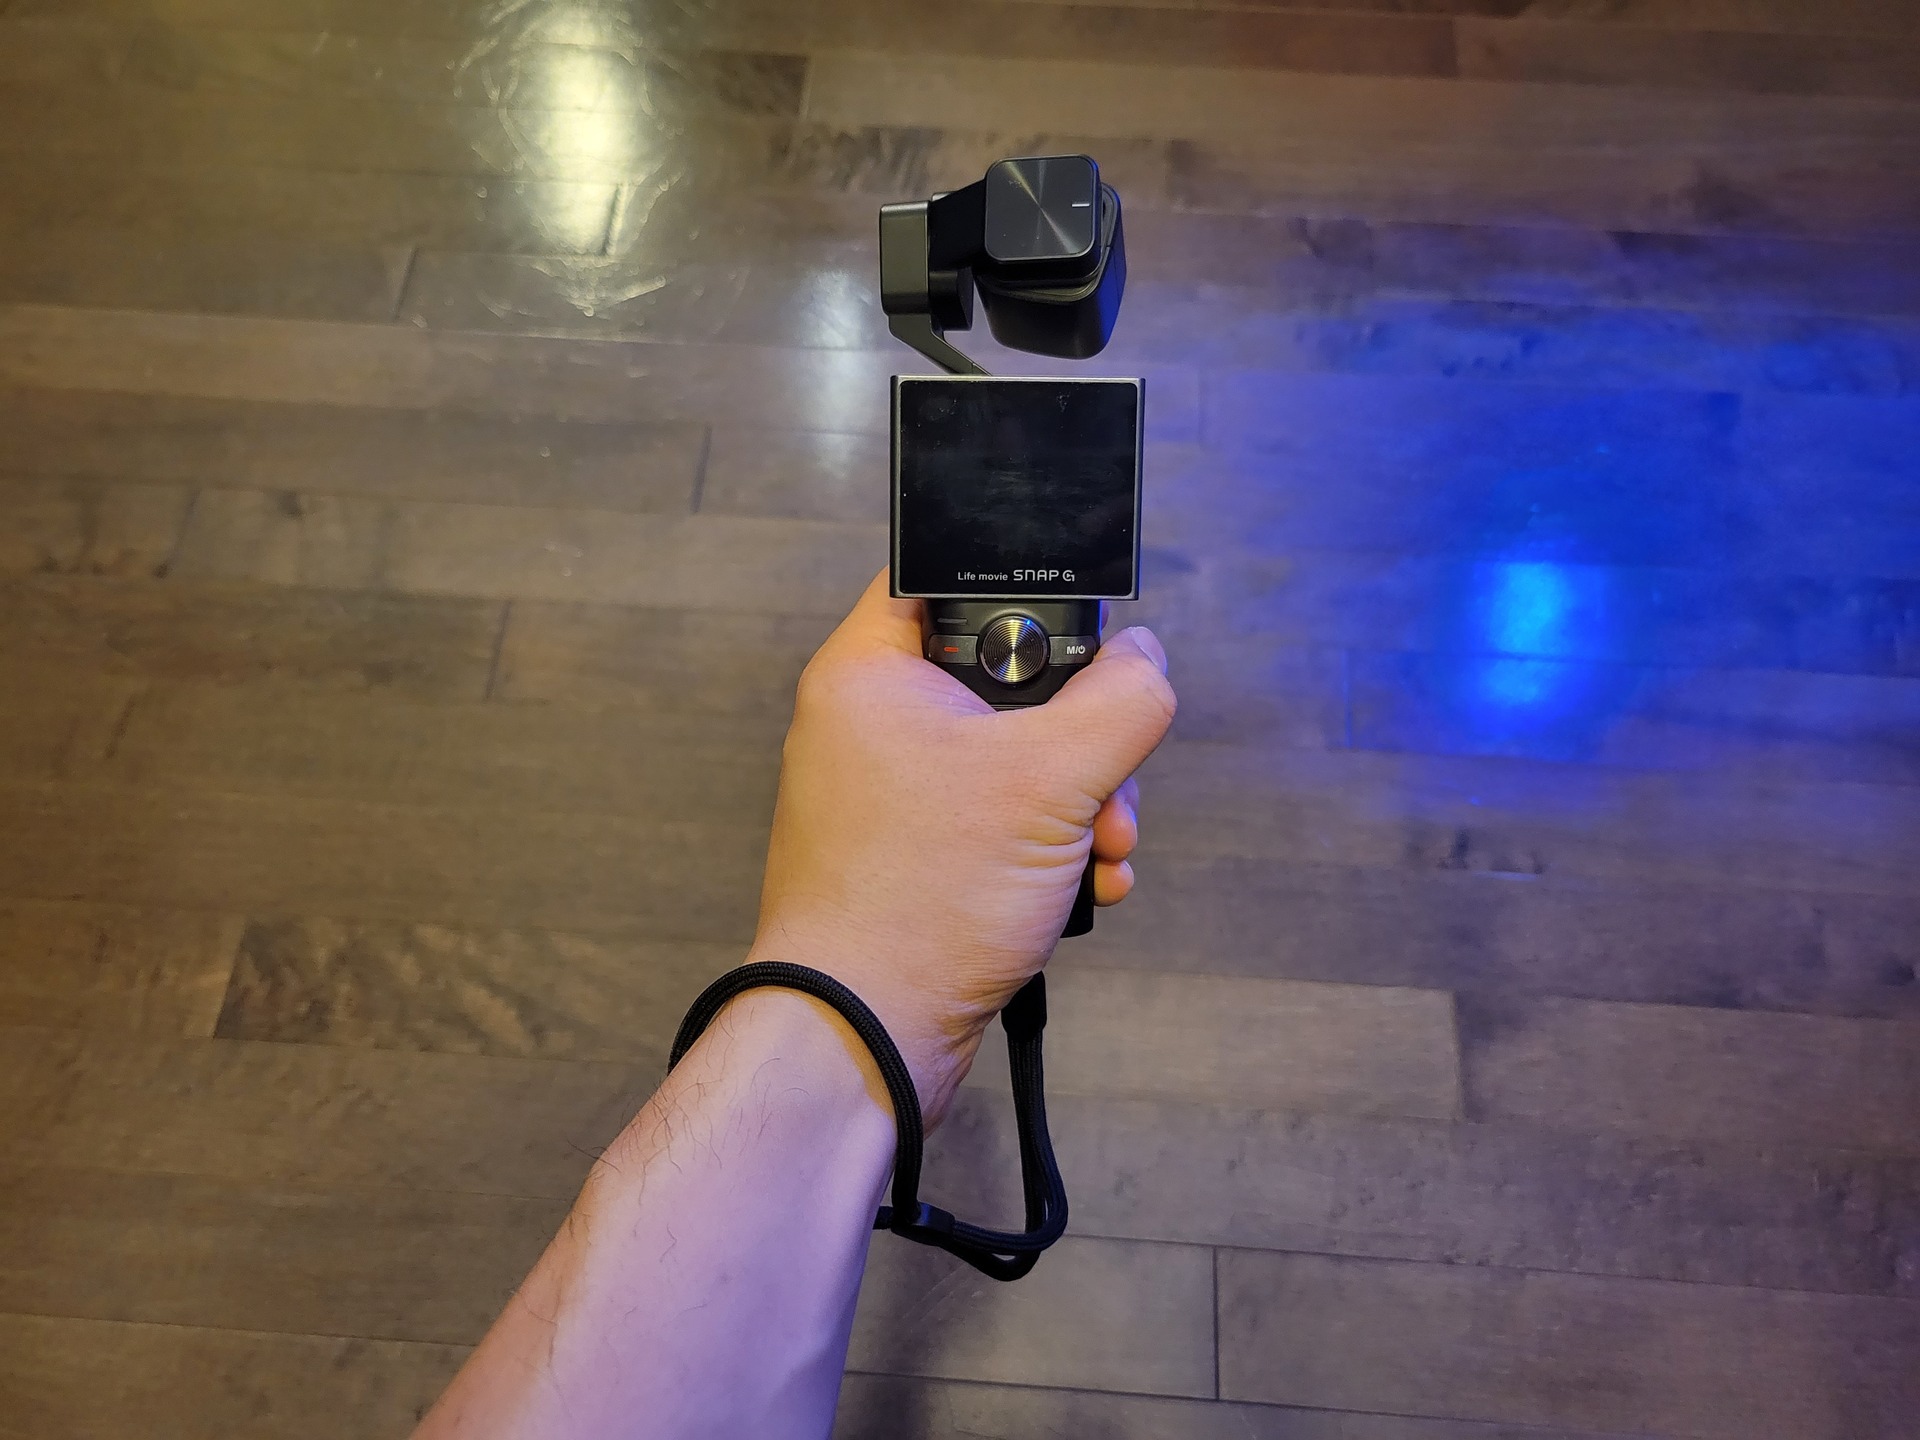 Holding the gimbal with wrist strap on